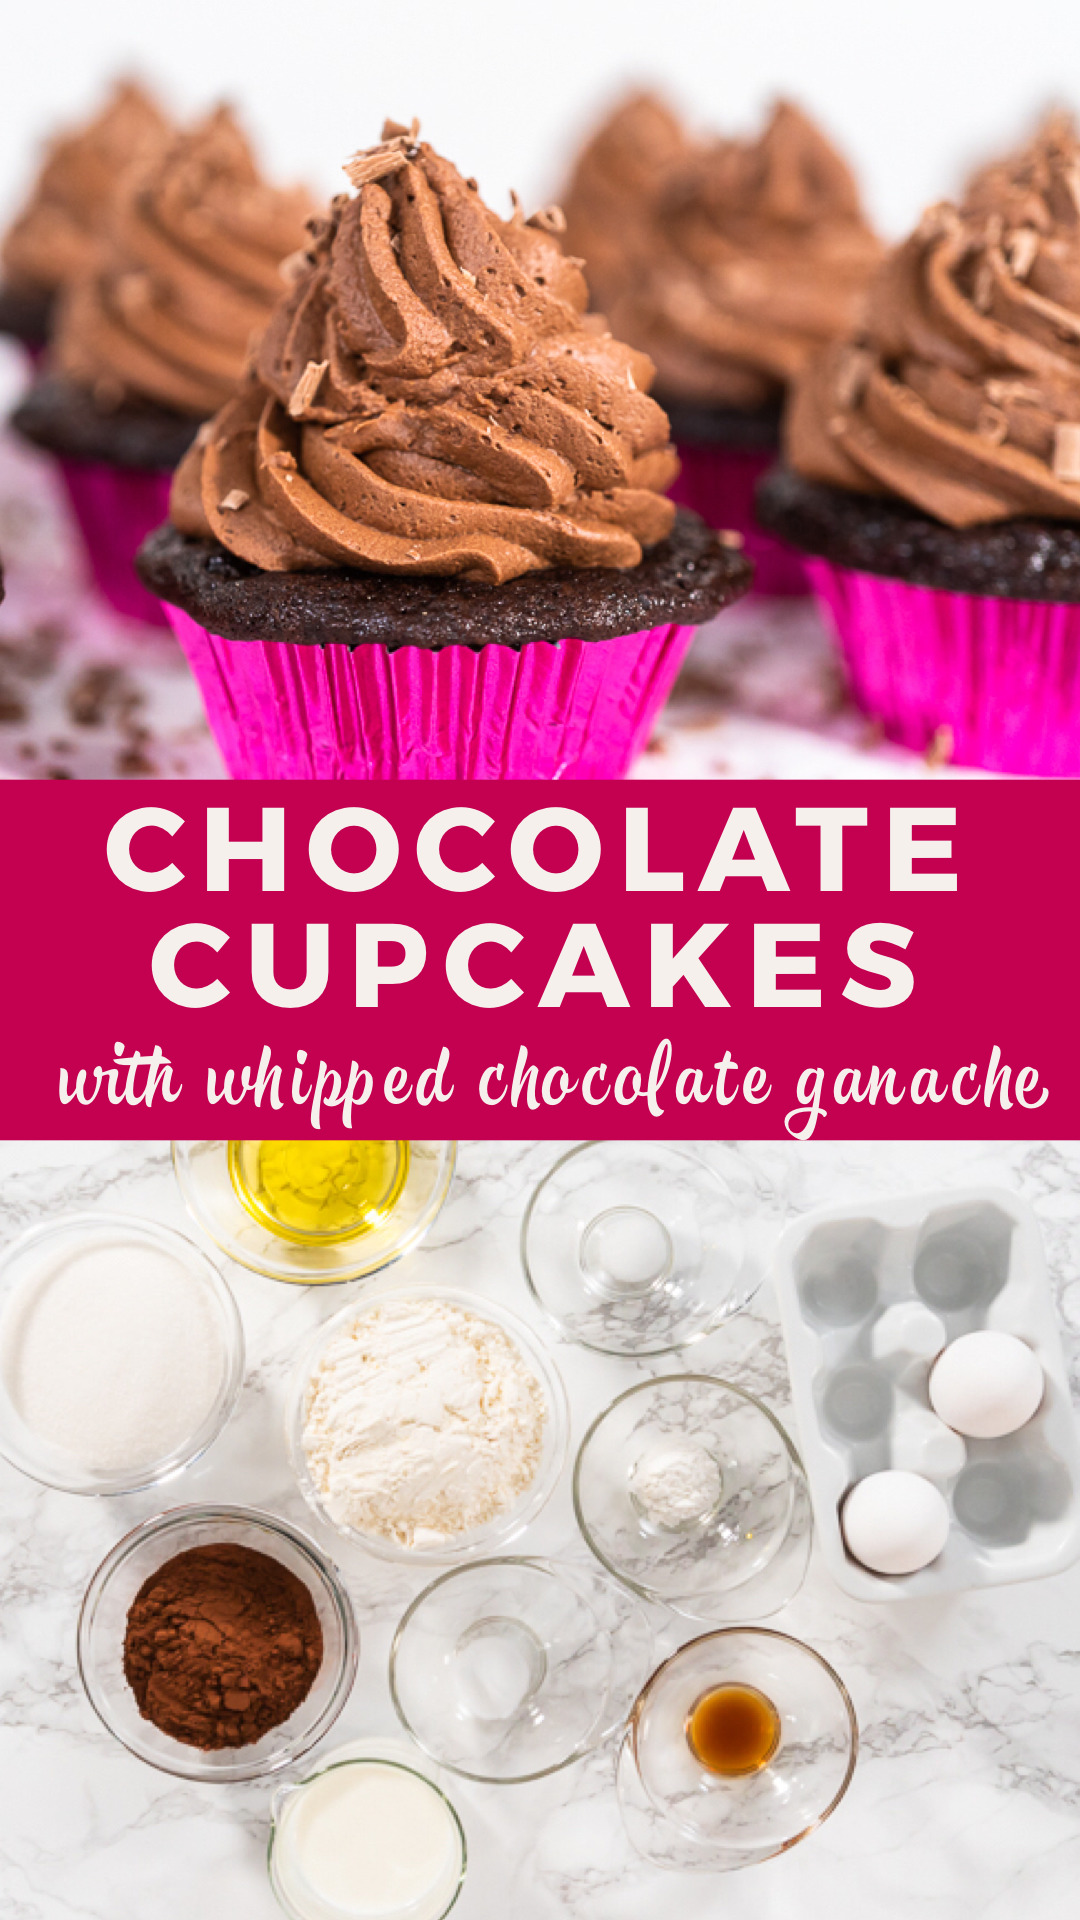 Chocolate cupcakes with chocolate frosting